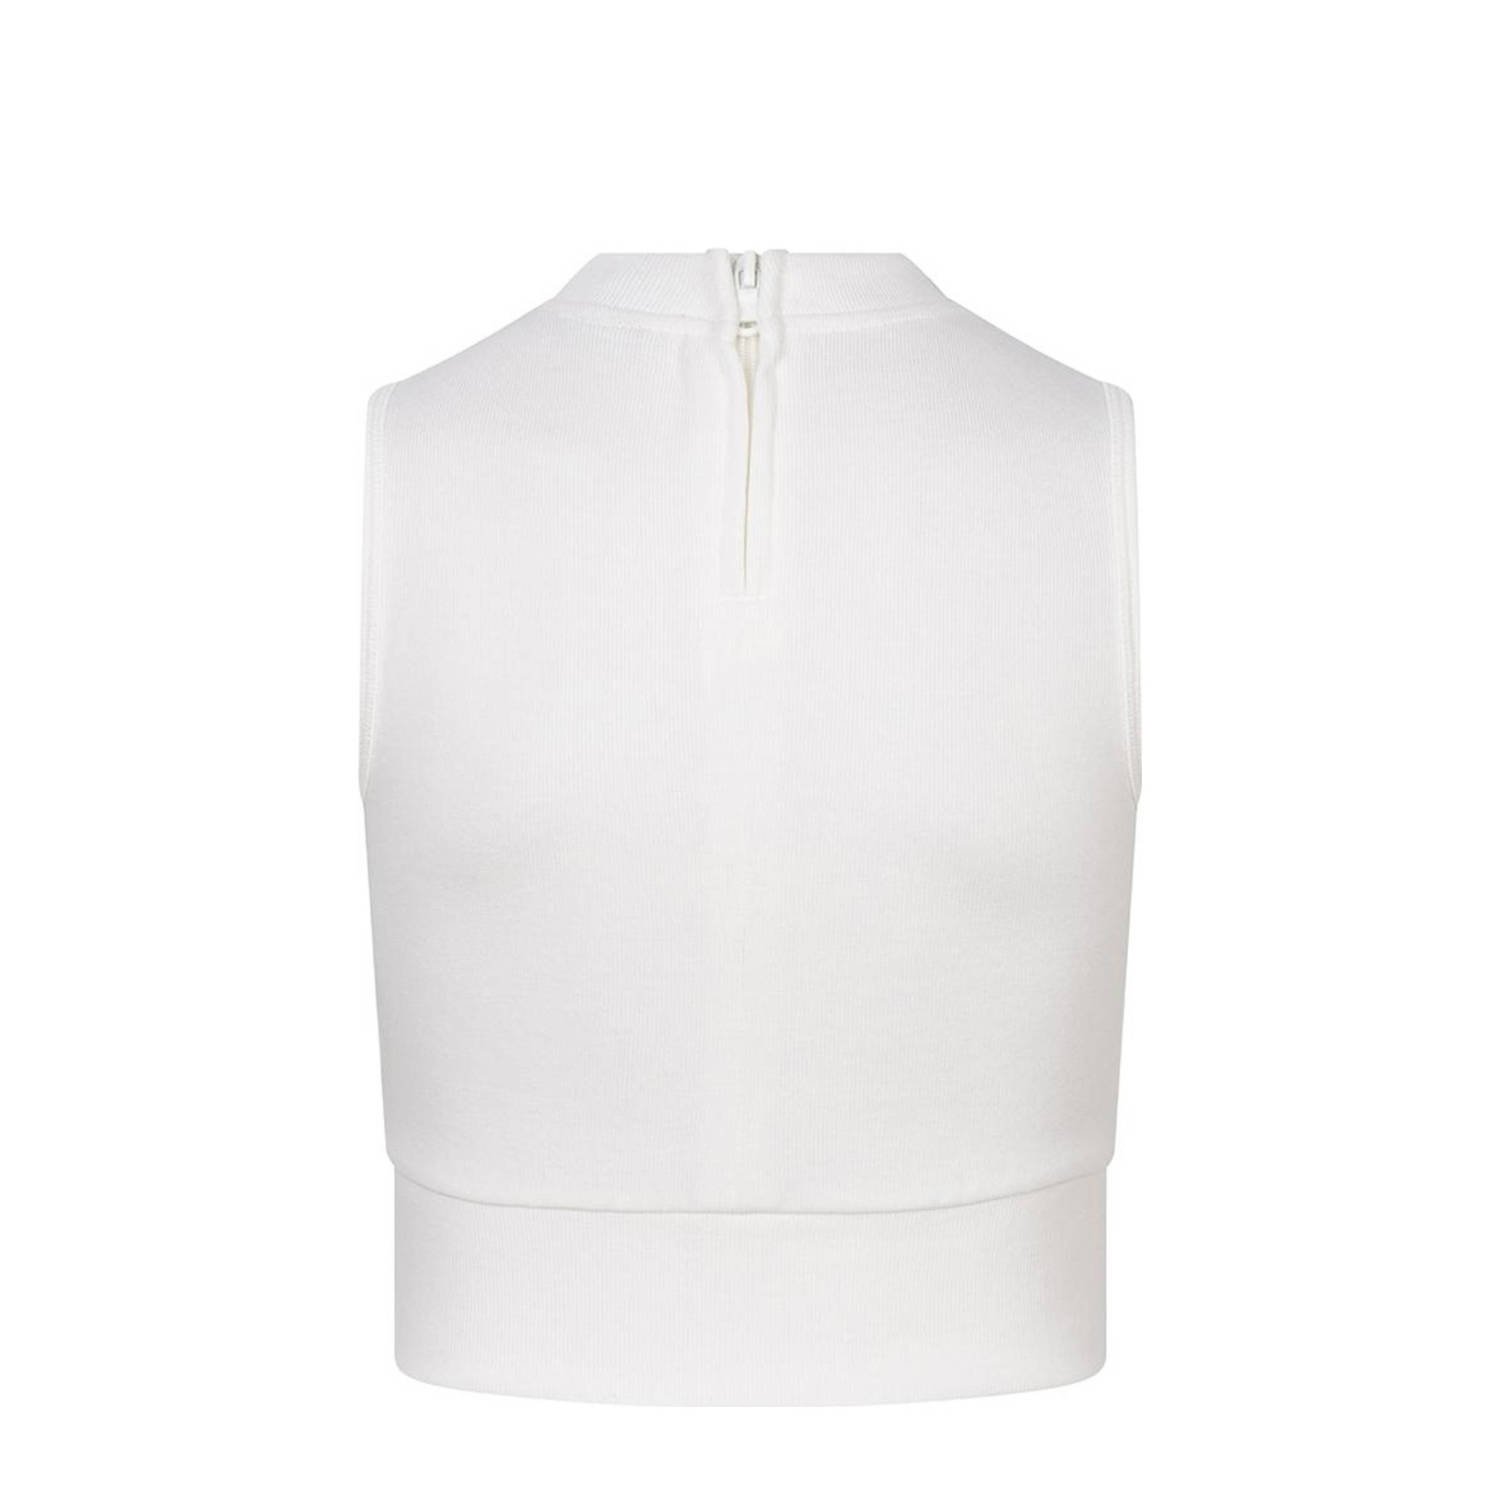 Indian Blue Jeans top offwhite